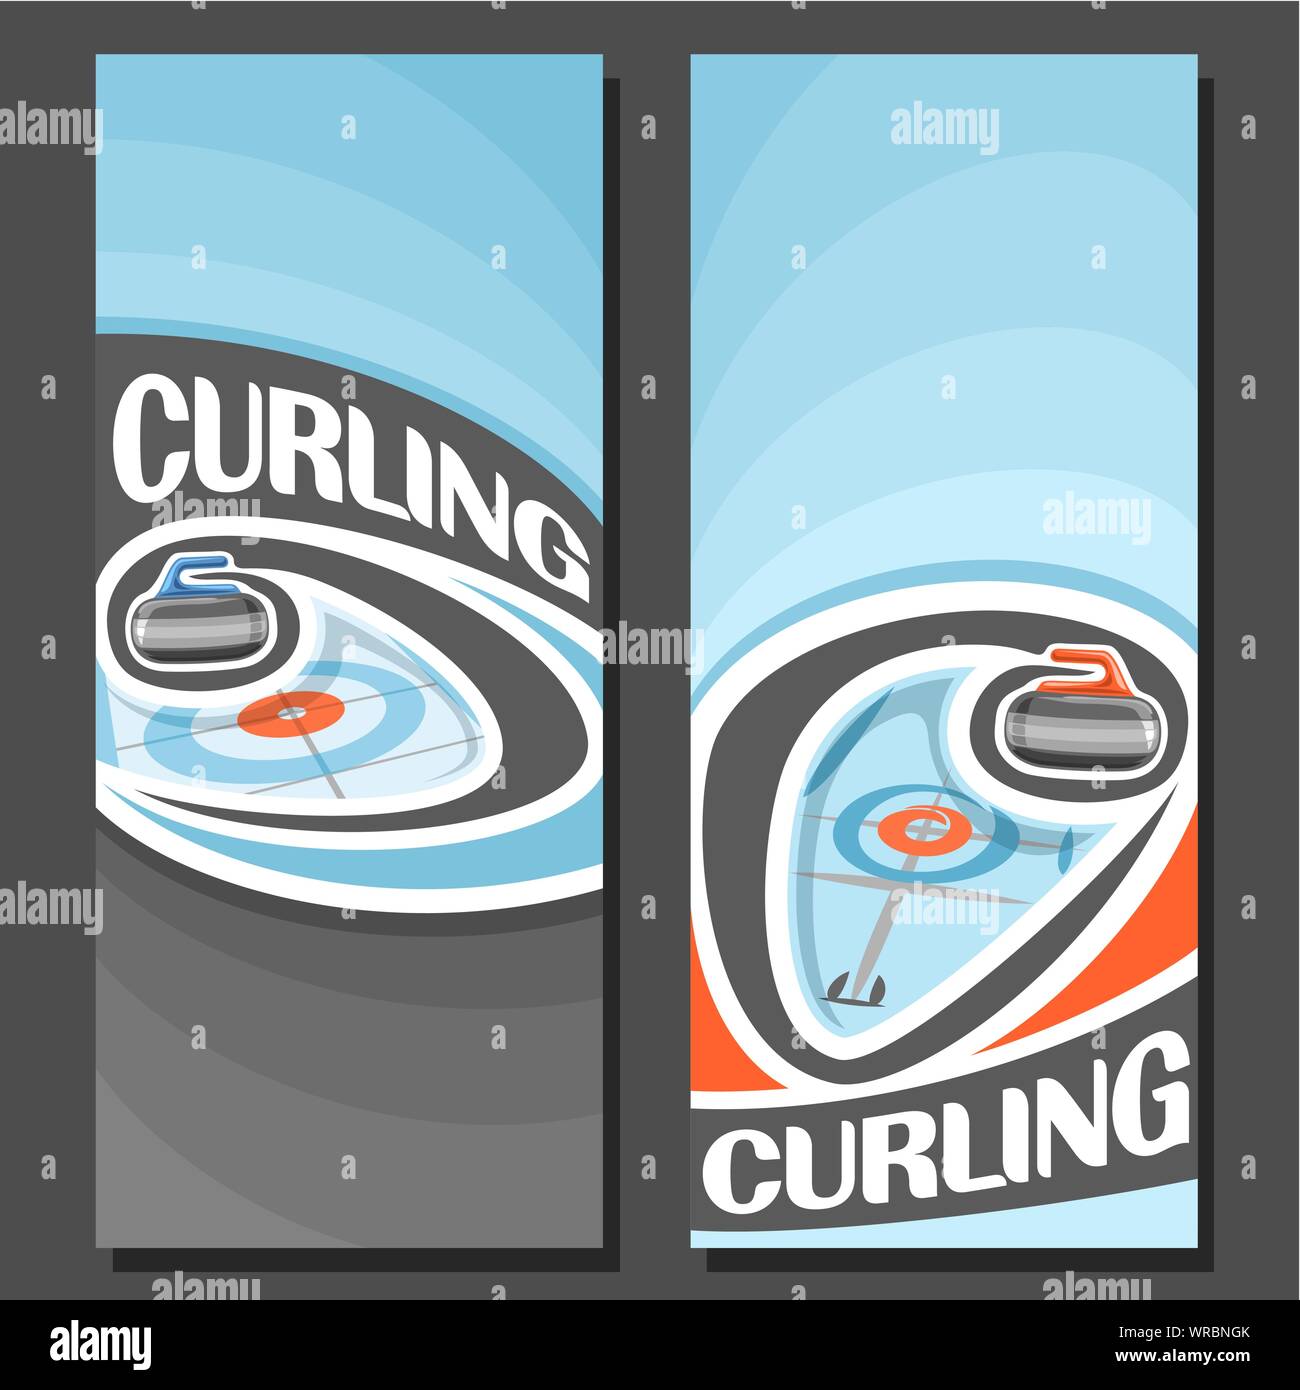 Vector vertical Banners for Curling game: 2 layouts for text on curling theme, granite stone sliding on ice rink on blue background. Stock Vector